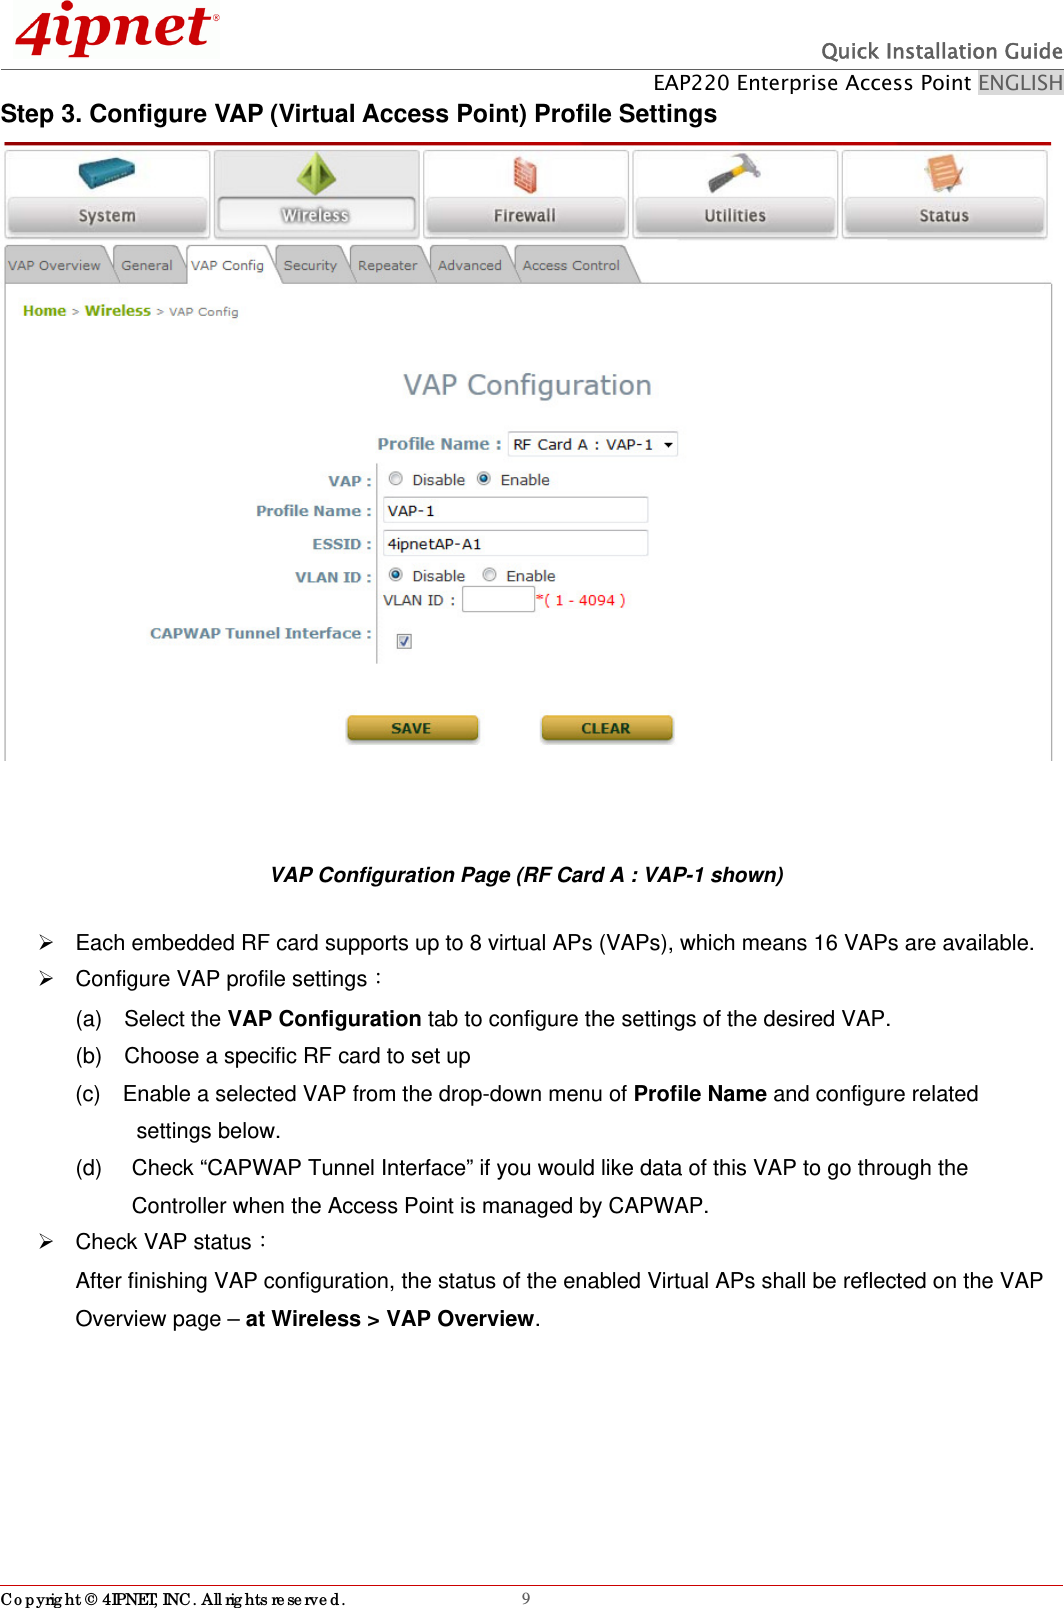  Quick Installation Guide EAP220 Enterprise Access Point ENGLISH Copyright © 4IPNET, INC. All rights reserved.                                                              9Step 3. Configure VAP (Virtual Access Point) Profile Settings   VAP Configuration Page (RF Card A : VAP-1 shown)   Each embedded RF card supports up to 8 virtual APs (VAPs), which means 16 VAPs are available.       Configure VAP profile settings： (a)  Select the VAP Configuration tab to configure the settings of the desired VAP.   (b)    Choose a specific RF card to set up   (c)    Enable a selected VAP from the drop-down menu of Profile Name and configure related     settings below. (d)    Check “CAPWAP Tunnel Interface” if you would like data of this VAP to go through the Controller when the Access Point is managed by CAPWAP.    Check VAP status： After finishing VAP configuration, the status of the enabled Virtual APs shall be reflected on the VAP Overview page – at Wireless &gt; VAP Overview.  